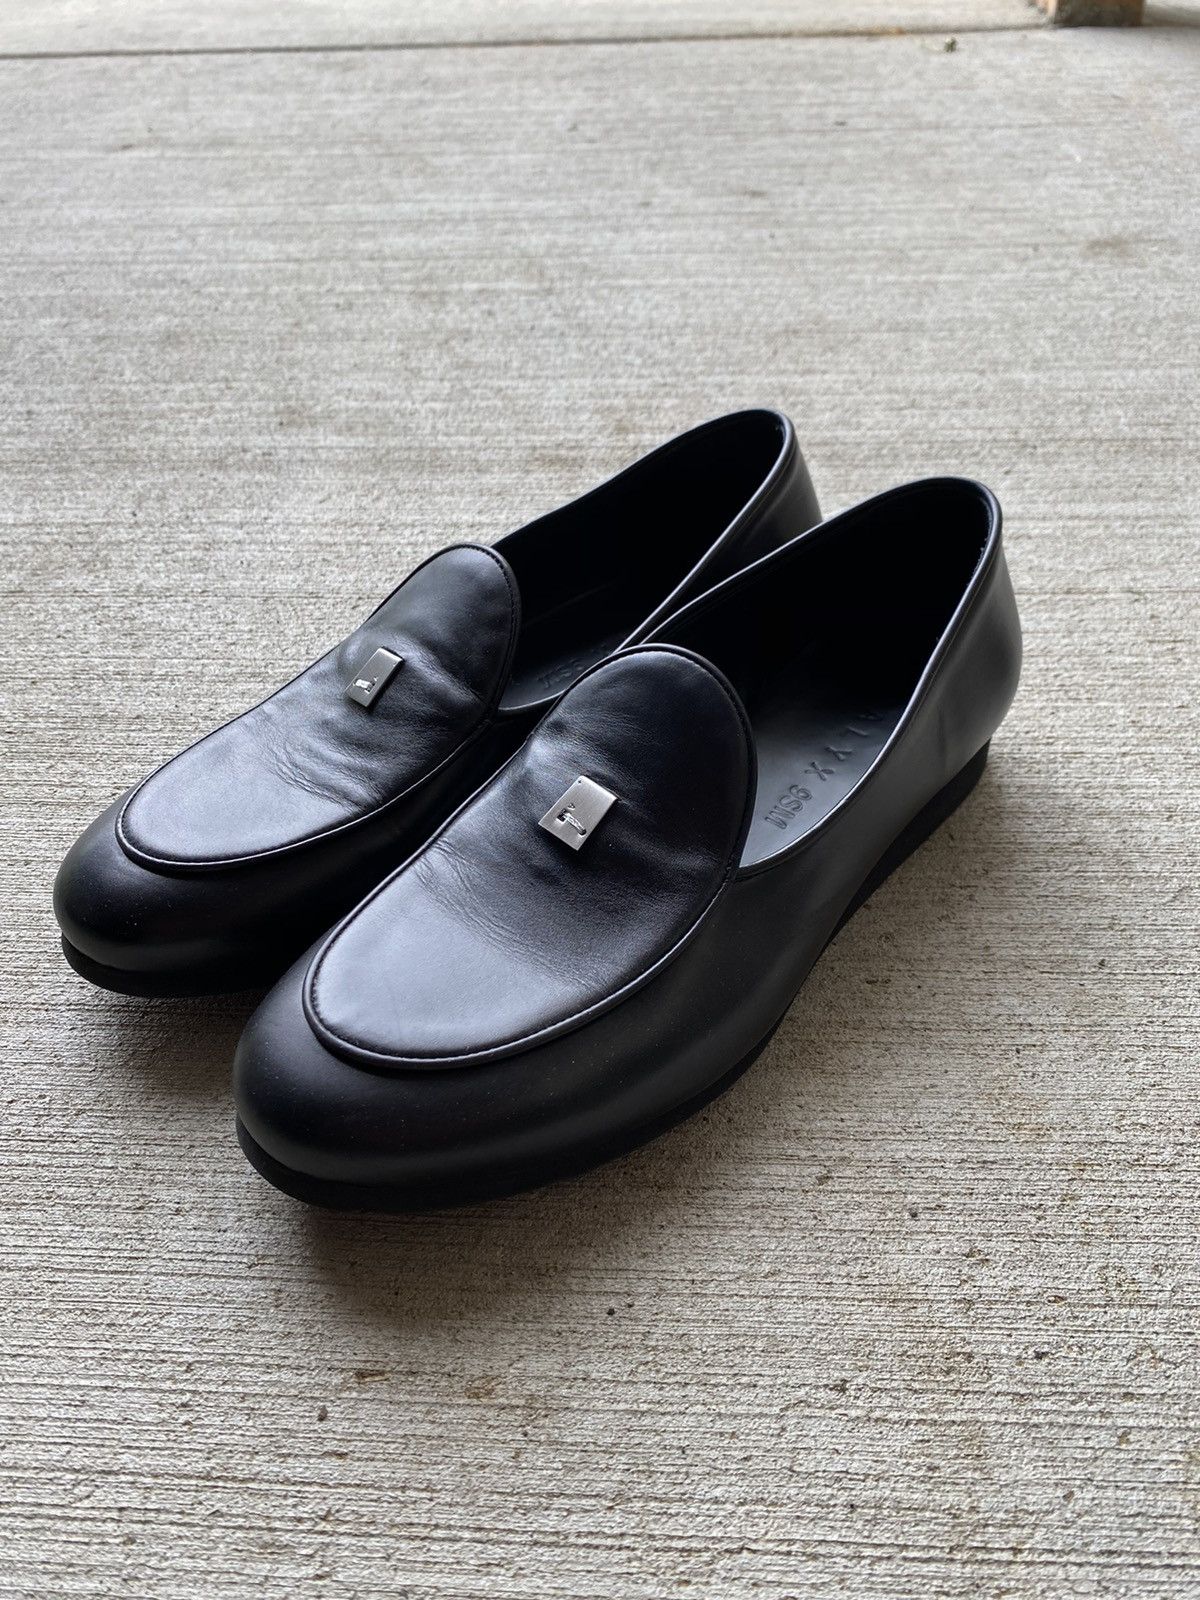 Alyx alyx st marks loafers | Grailed